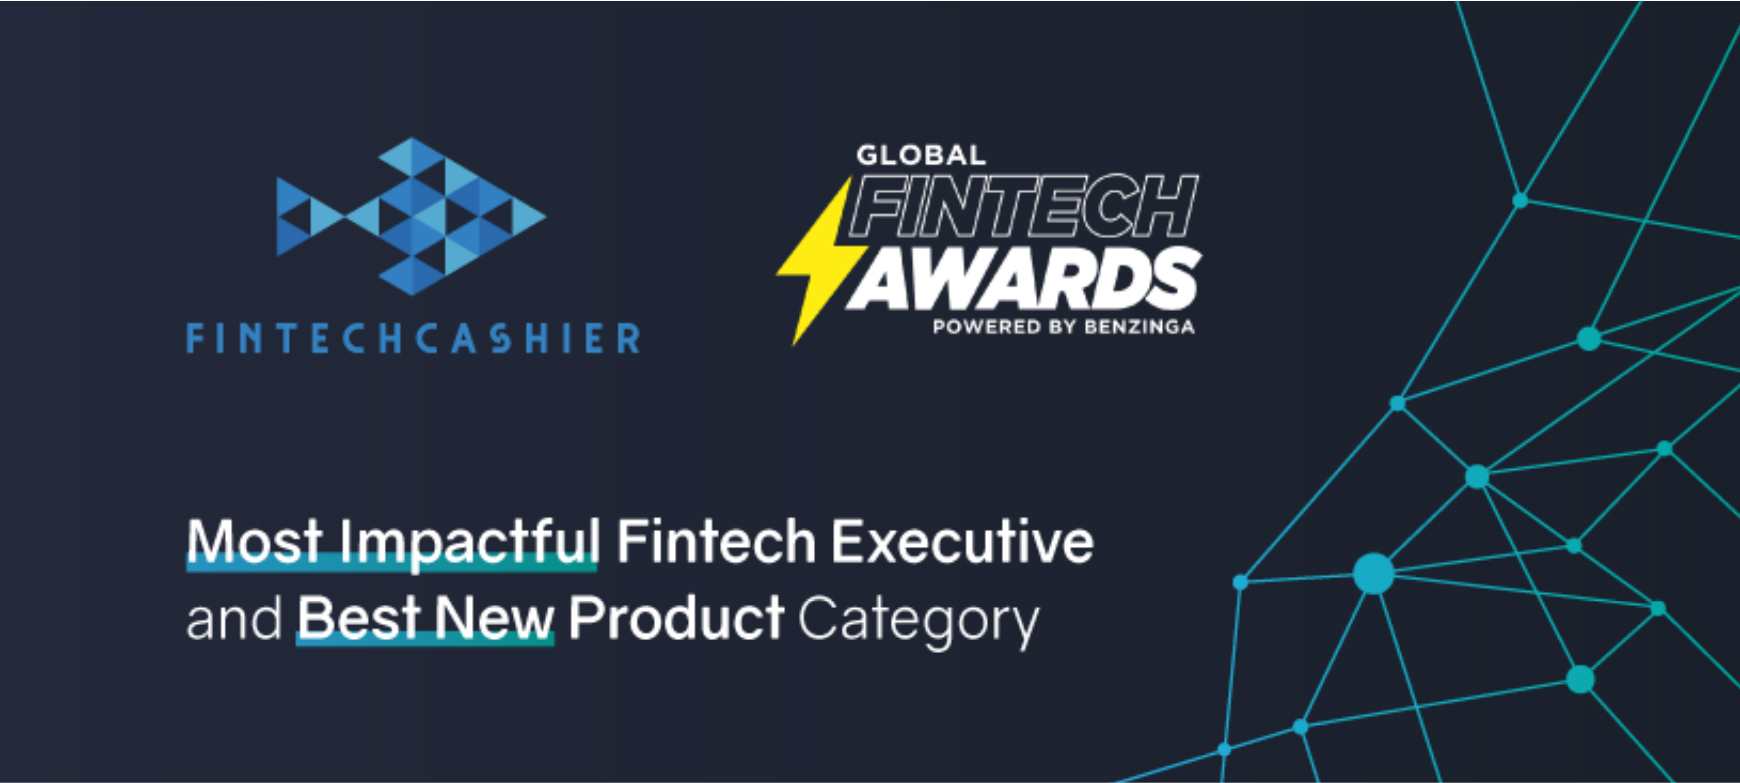 Most Impactful Fintech Executive and Best New Product category